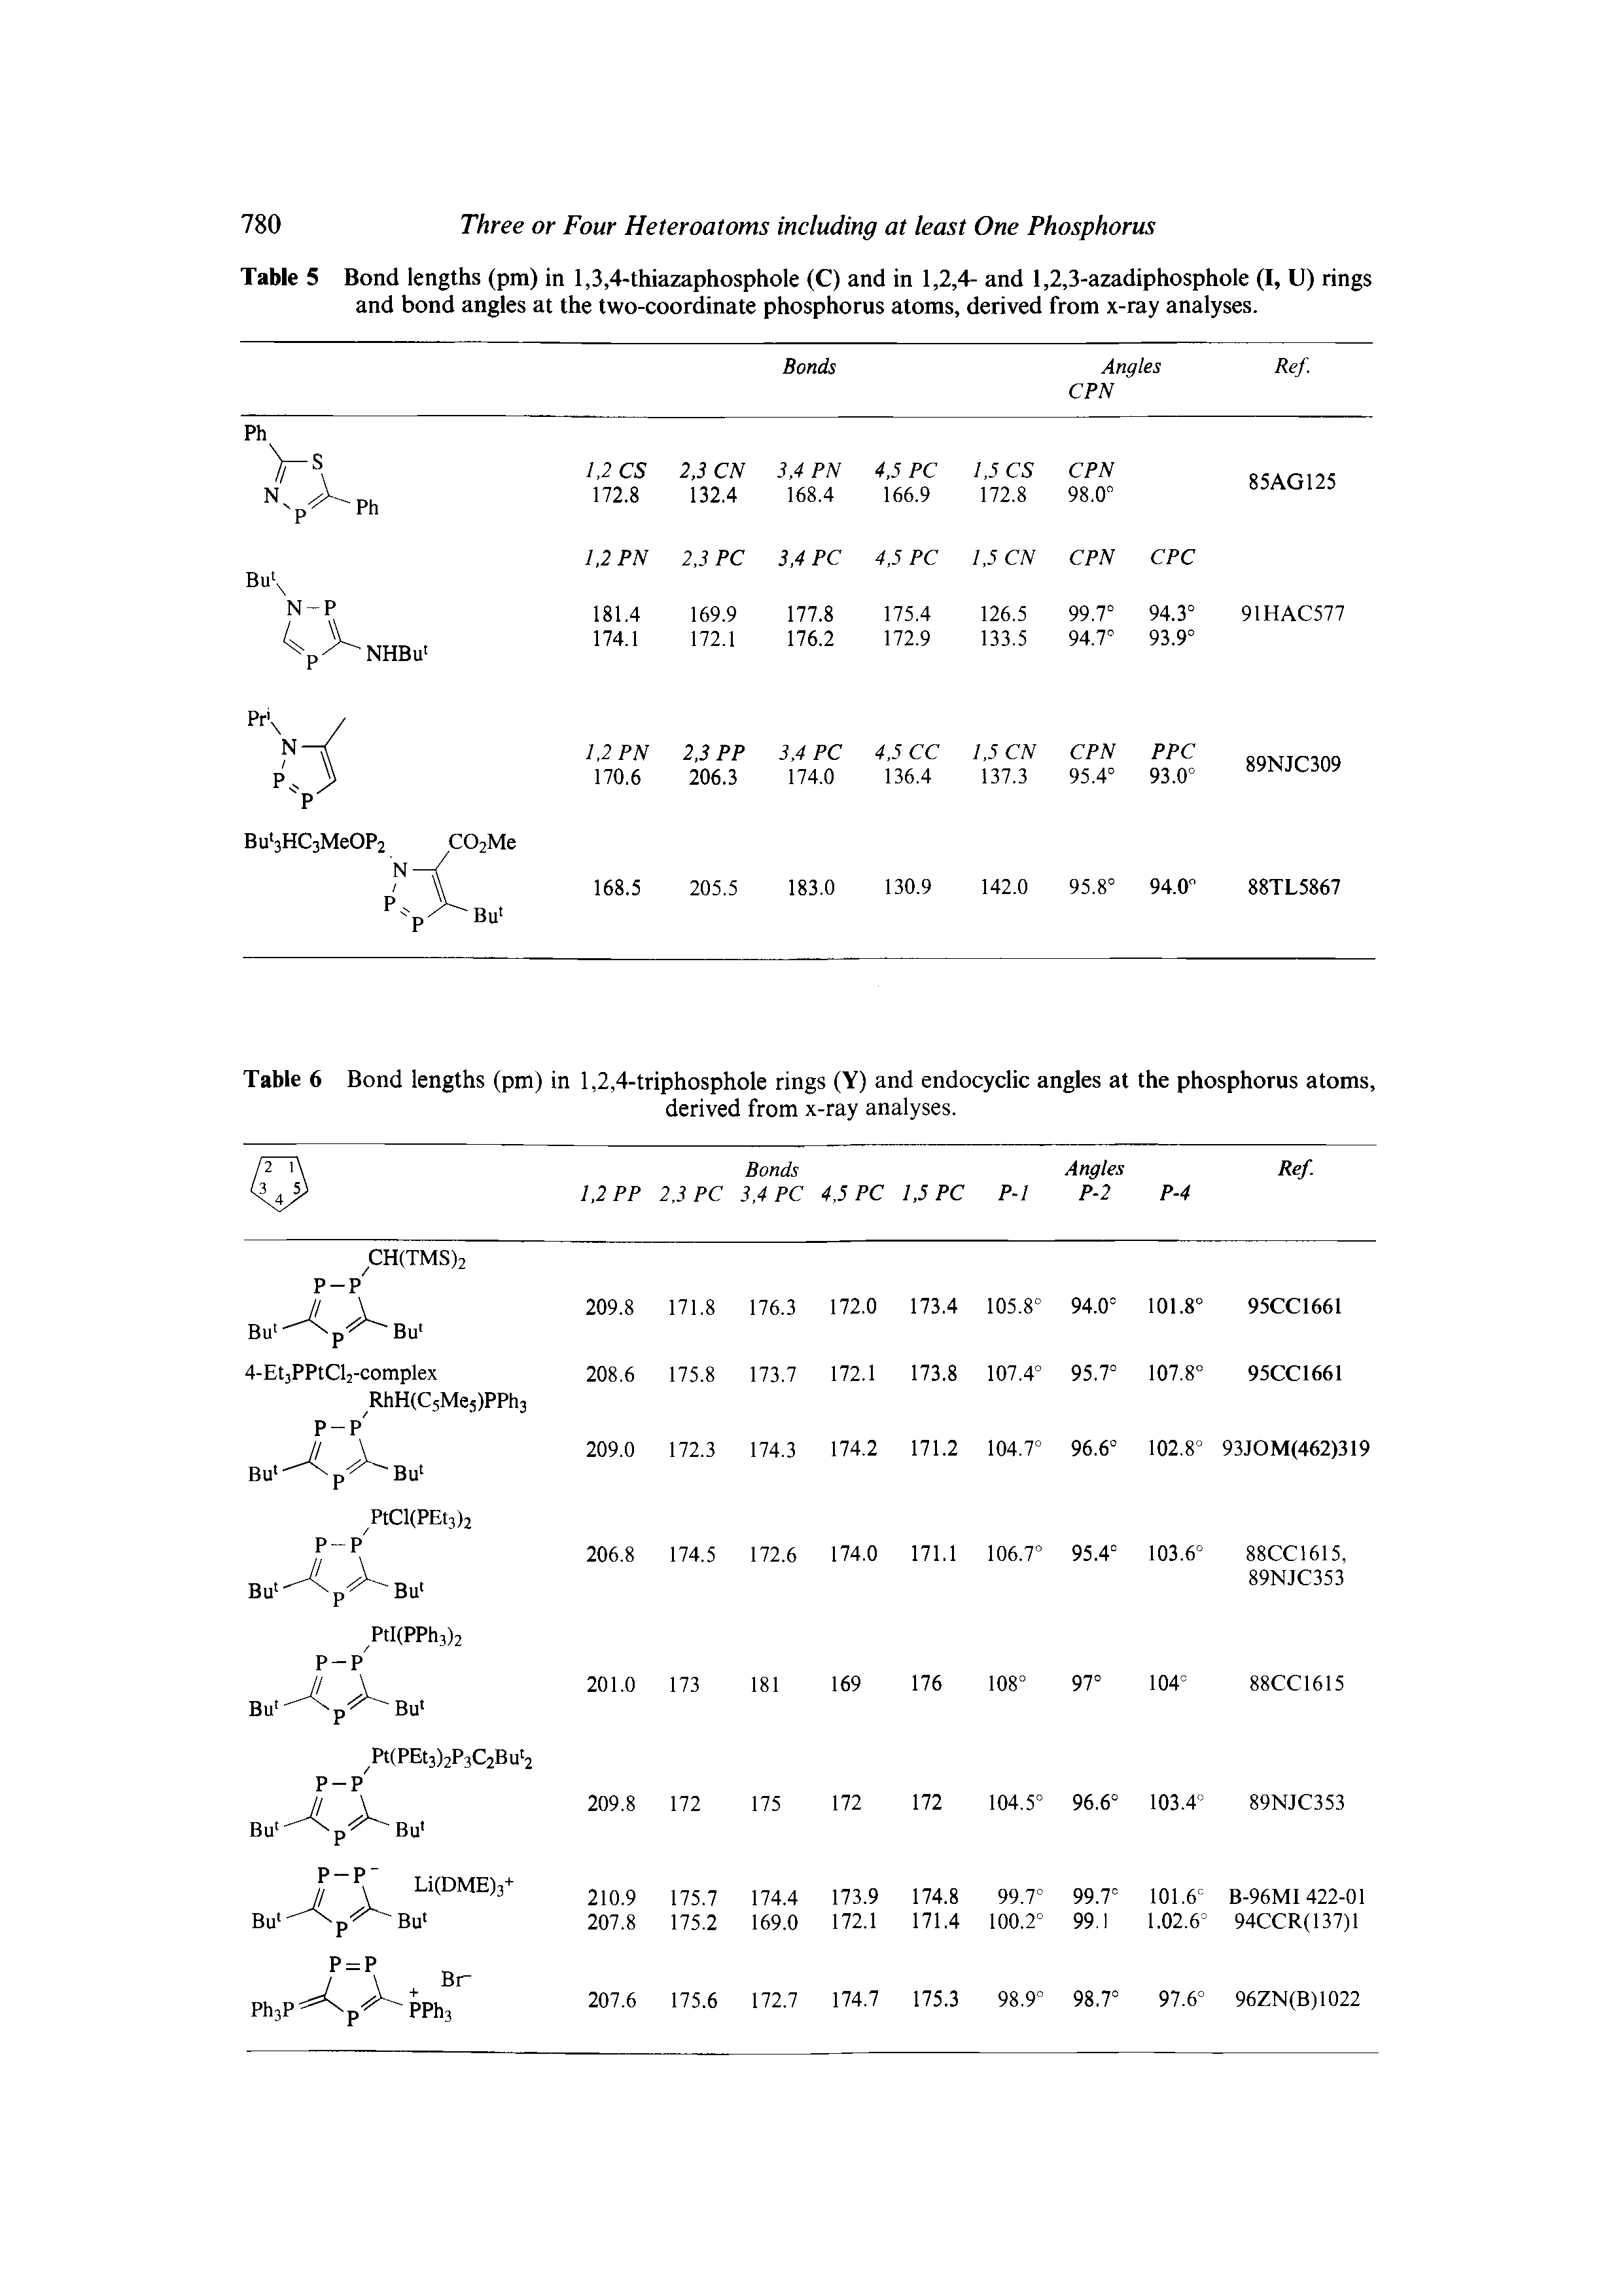 Table 6 Bond lengths (pm) in 1,2,4-triphosphole rings (Y) and endocyclic angles at the phosphorus atoms,...